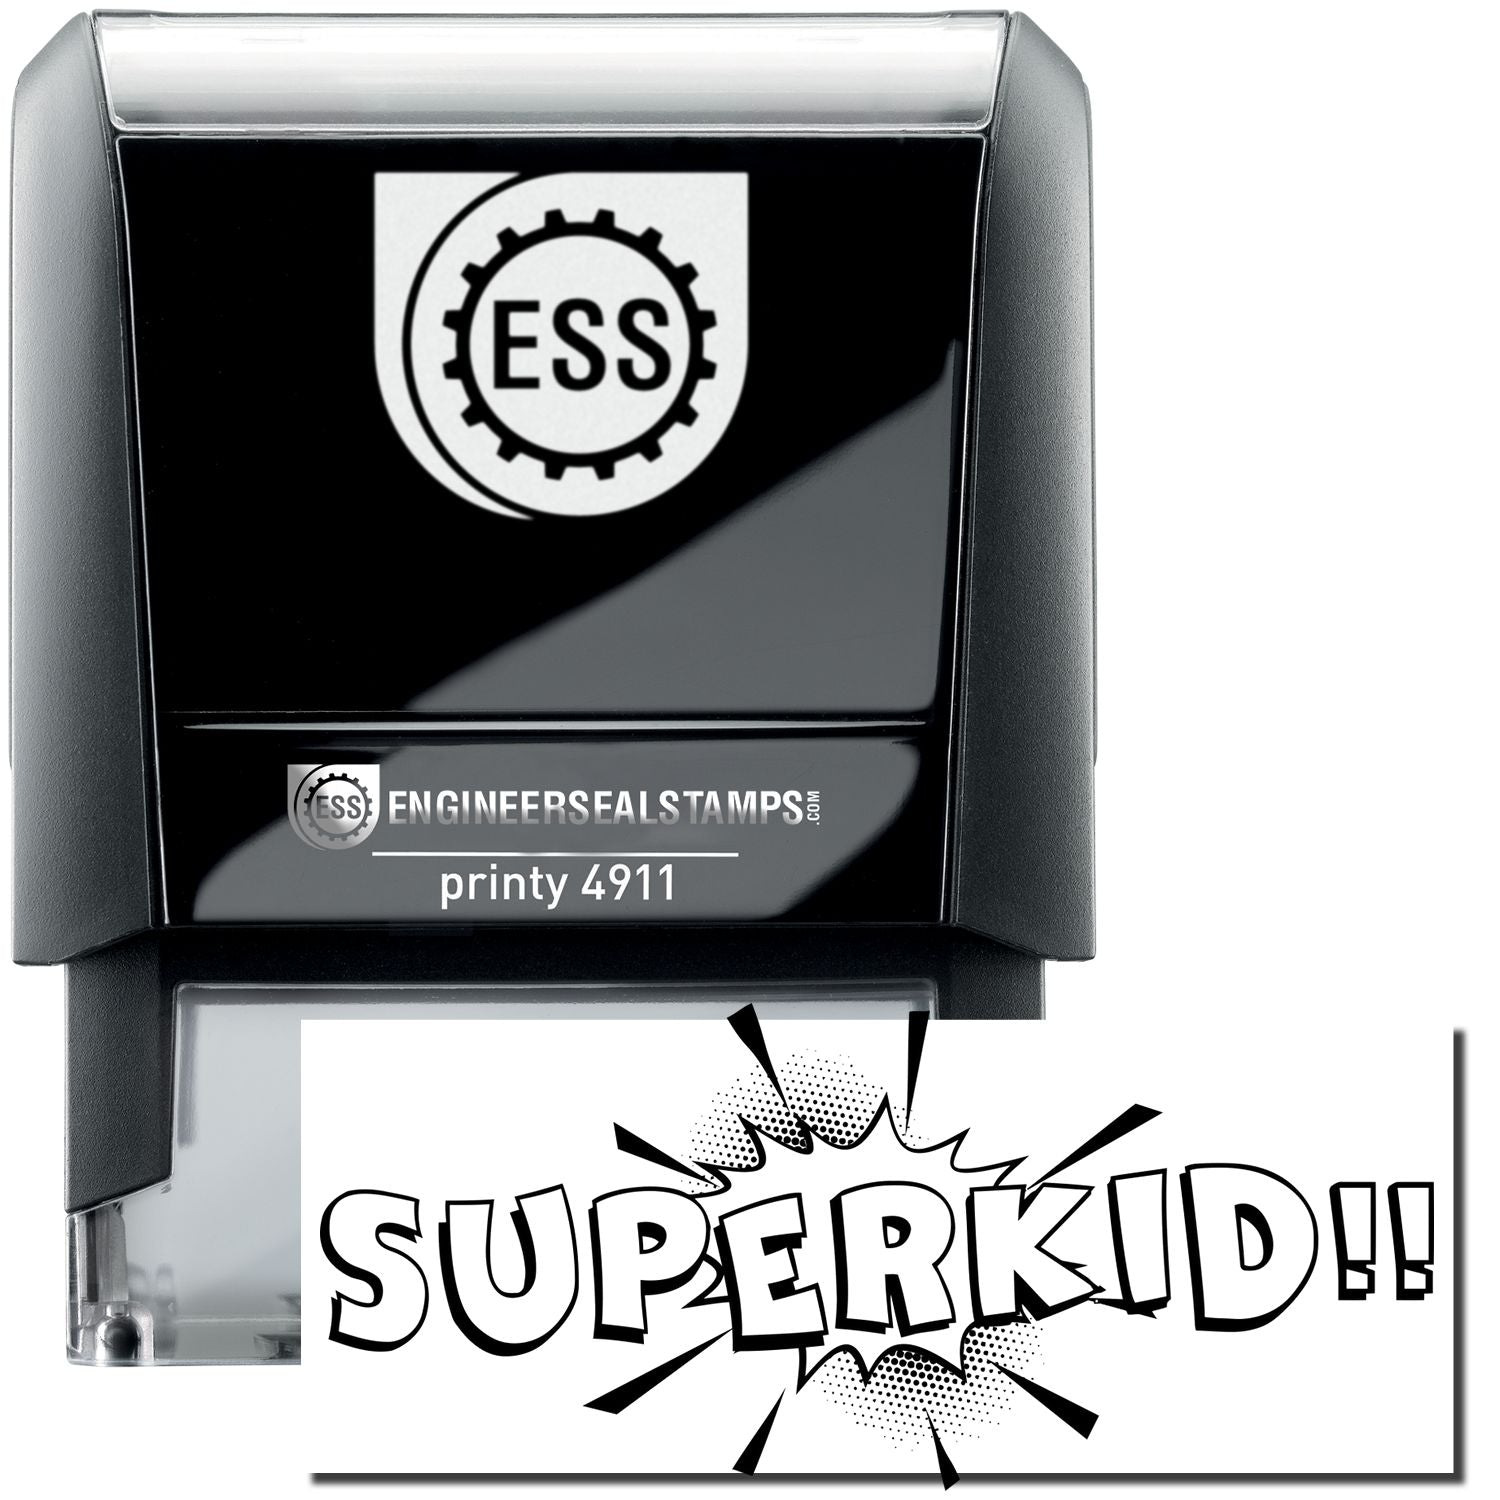 A self-inking stamp with a stamped image showing how the text "SUPERKID!!" (in a bold, urban font with a background that seems like it came out of comic book pages) is displayed after stamping.